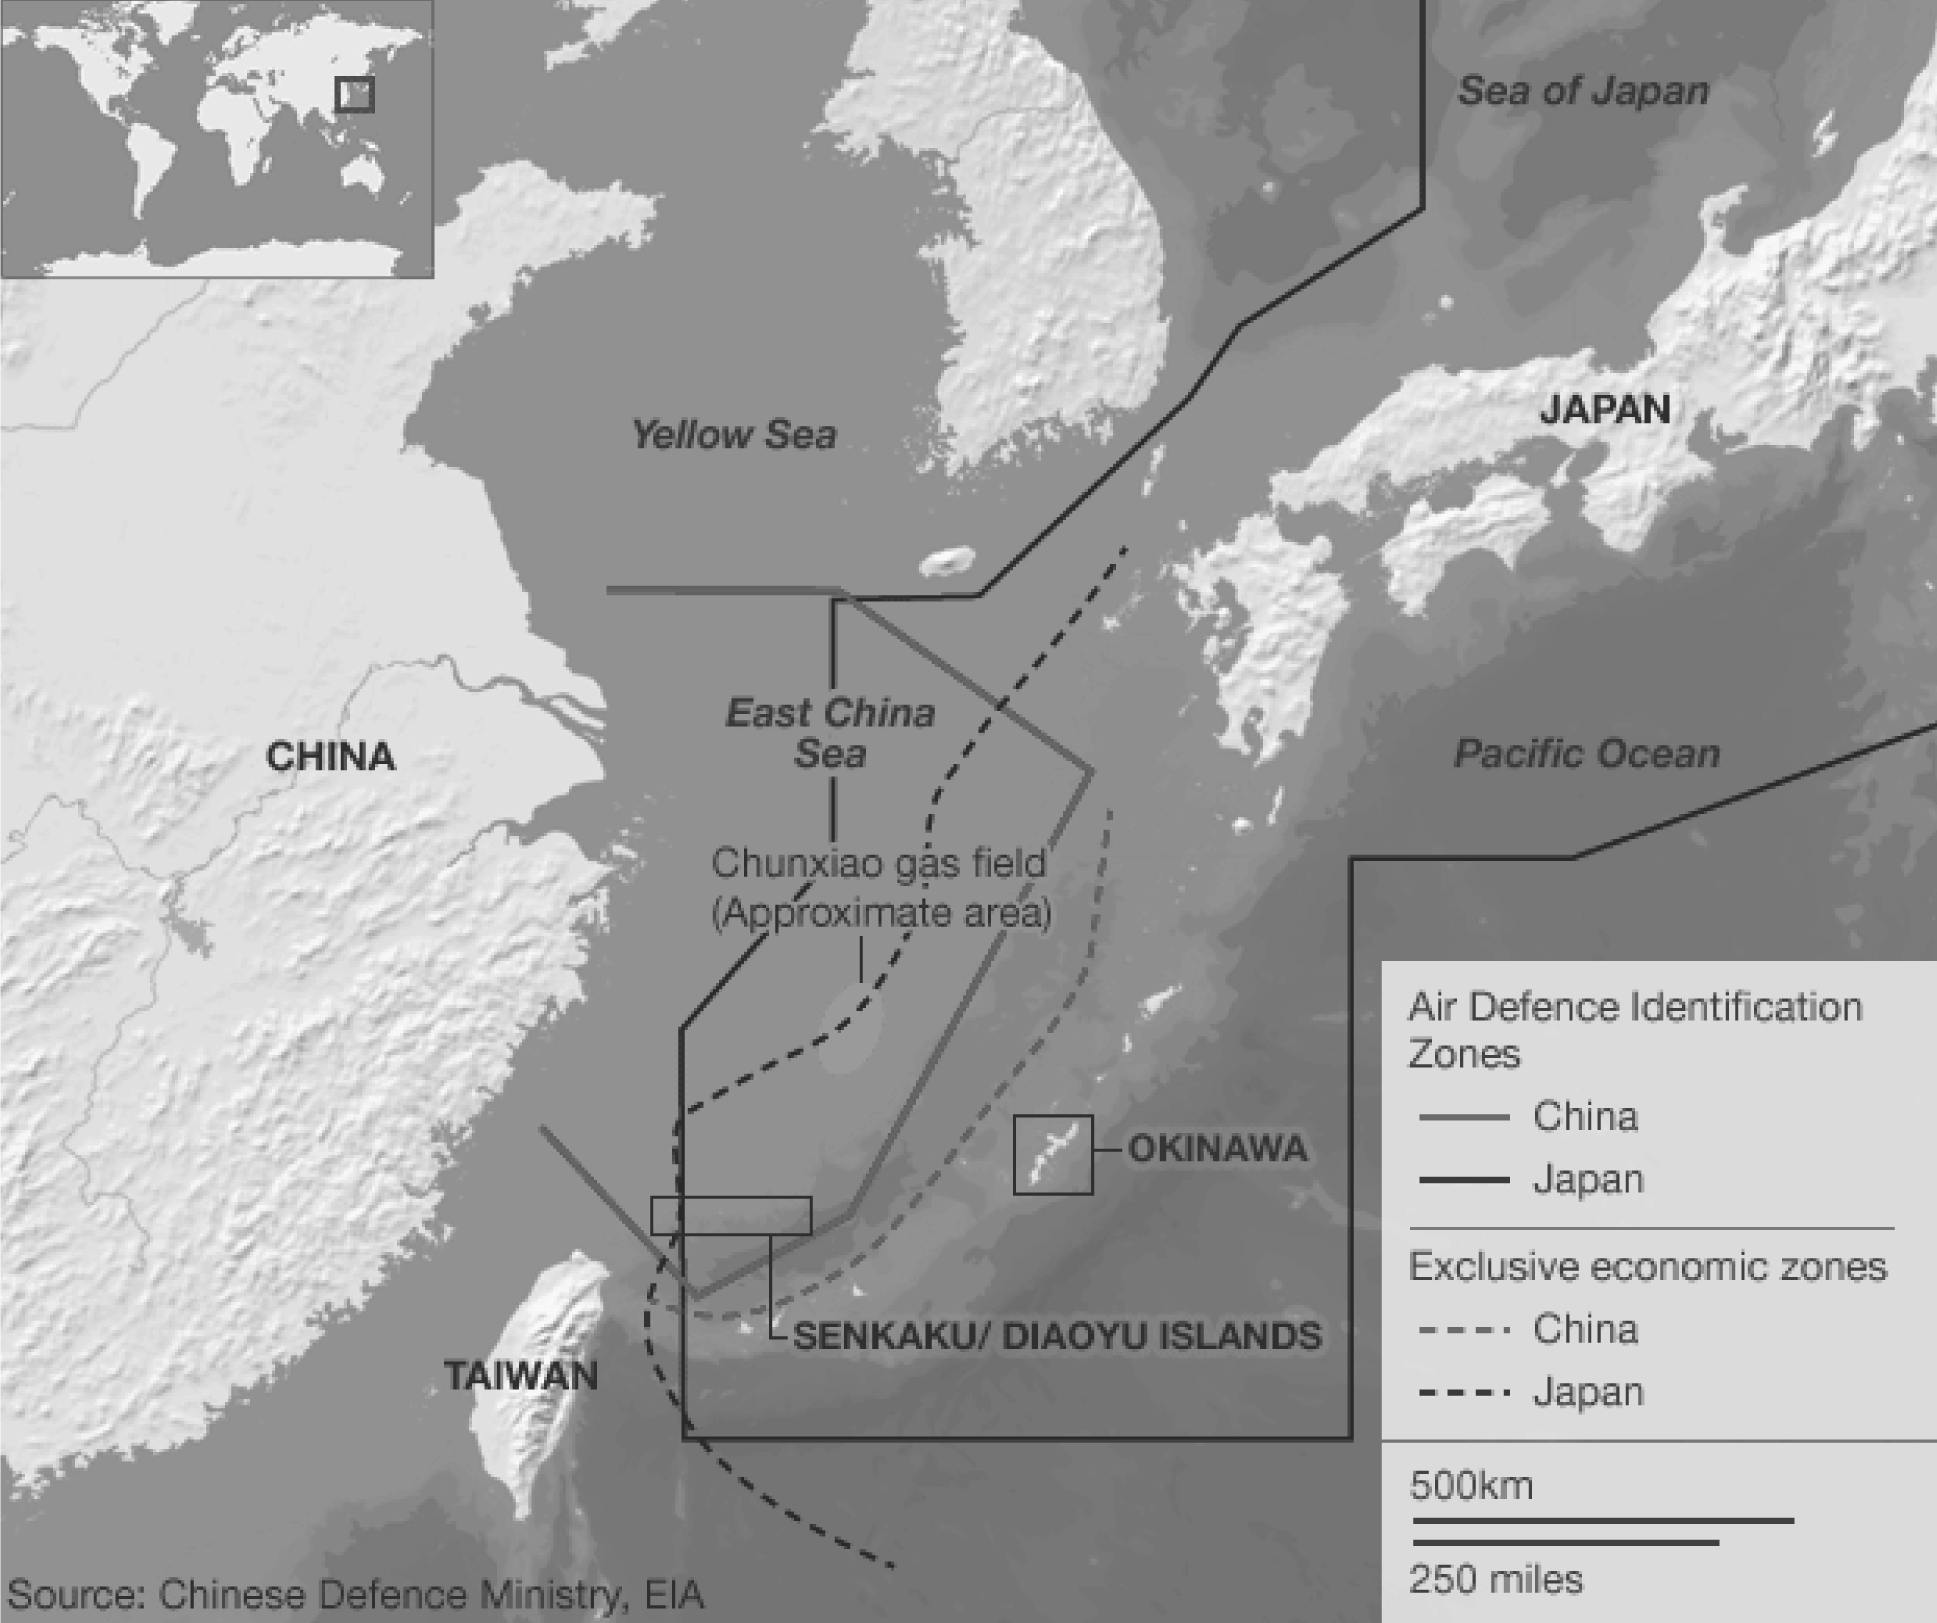 Map of territorial claims in the East China Sea